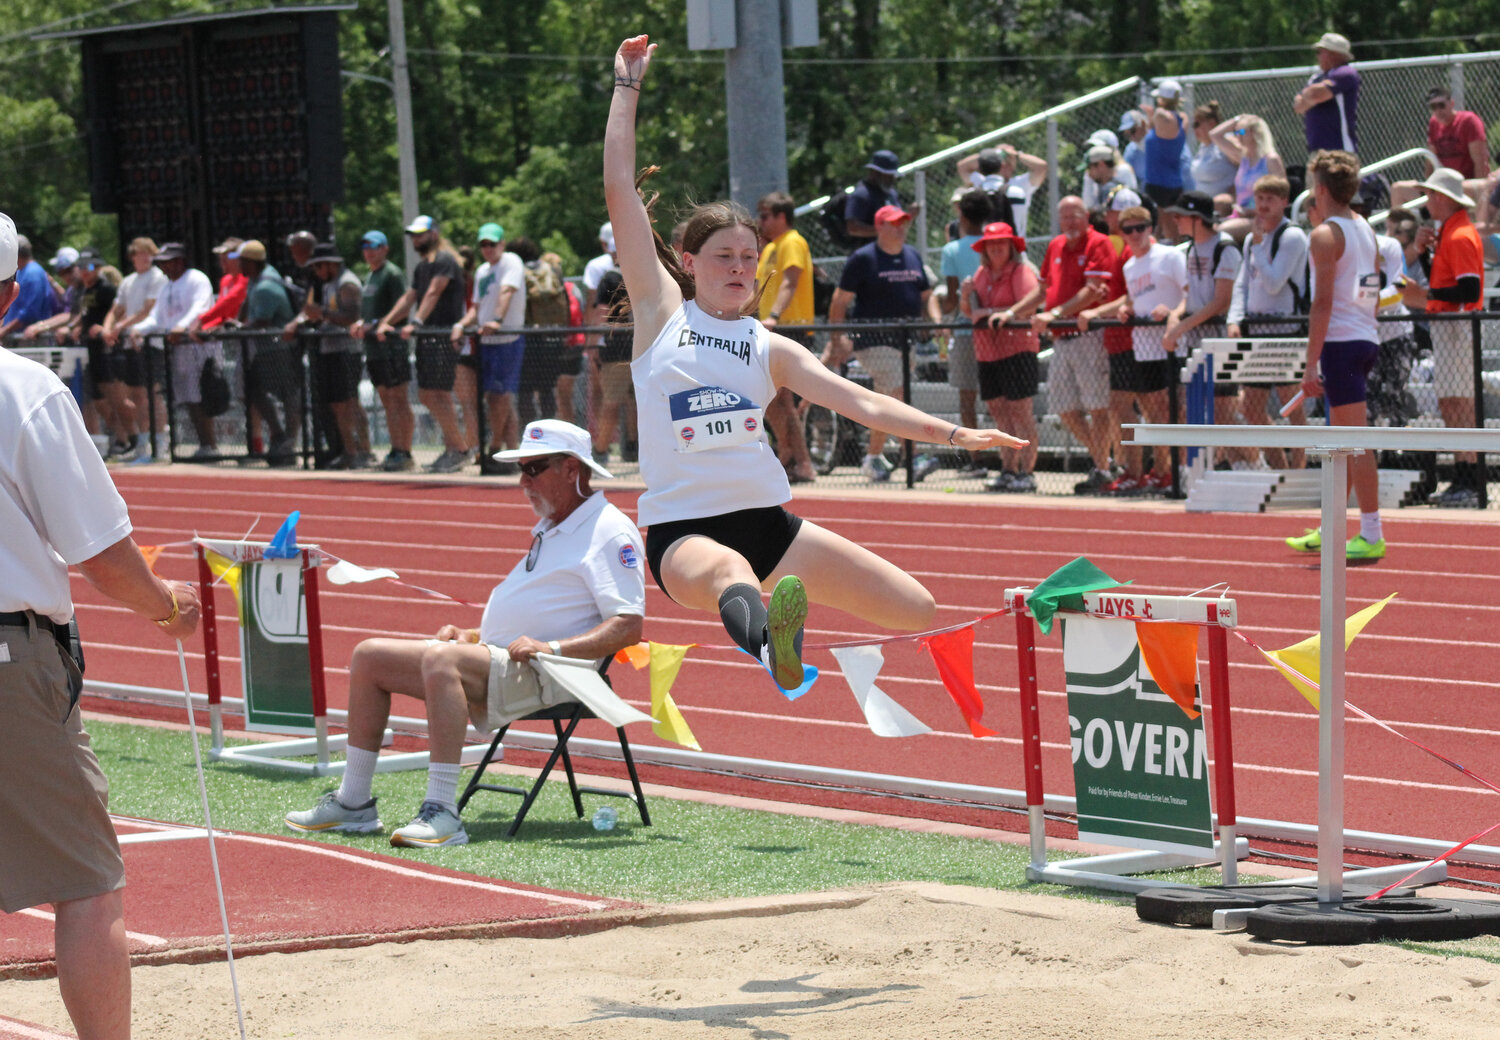 Centralia senior Autumn Hawkins glides through the air on her school-record-breaking long jump on Saturday in the Class 3 state track and field meet.